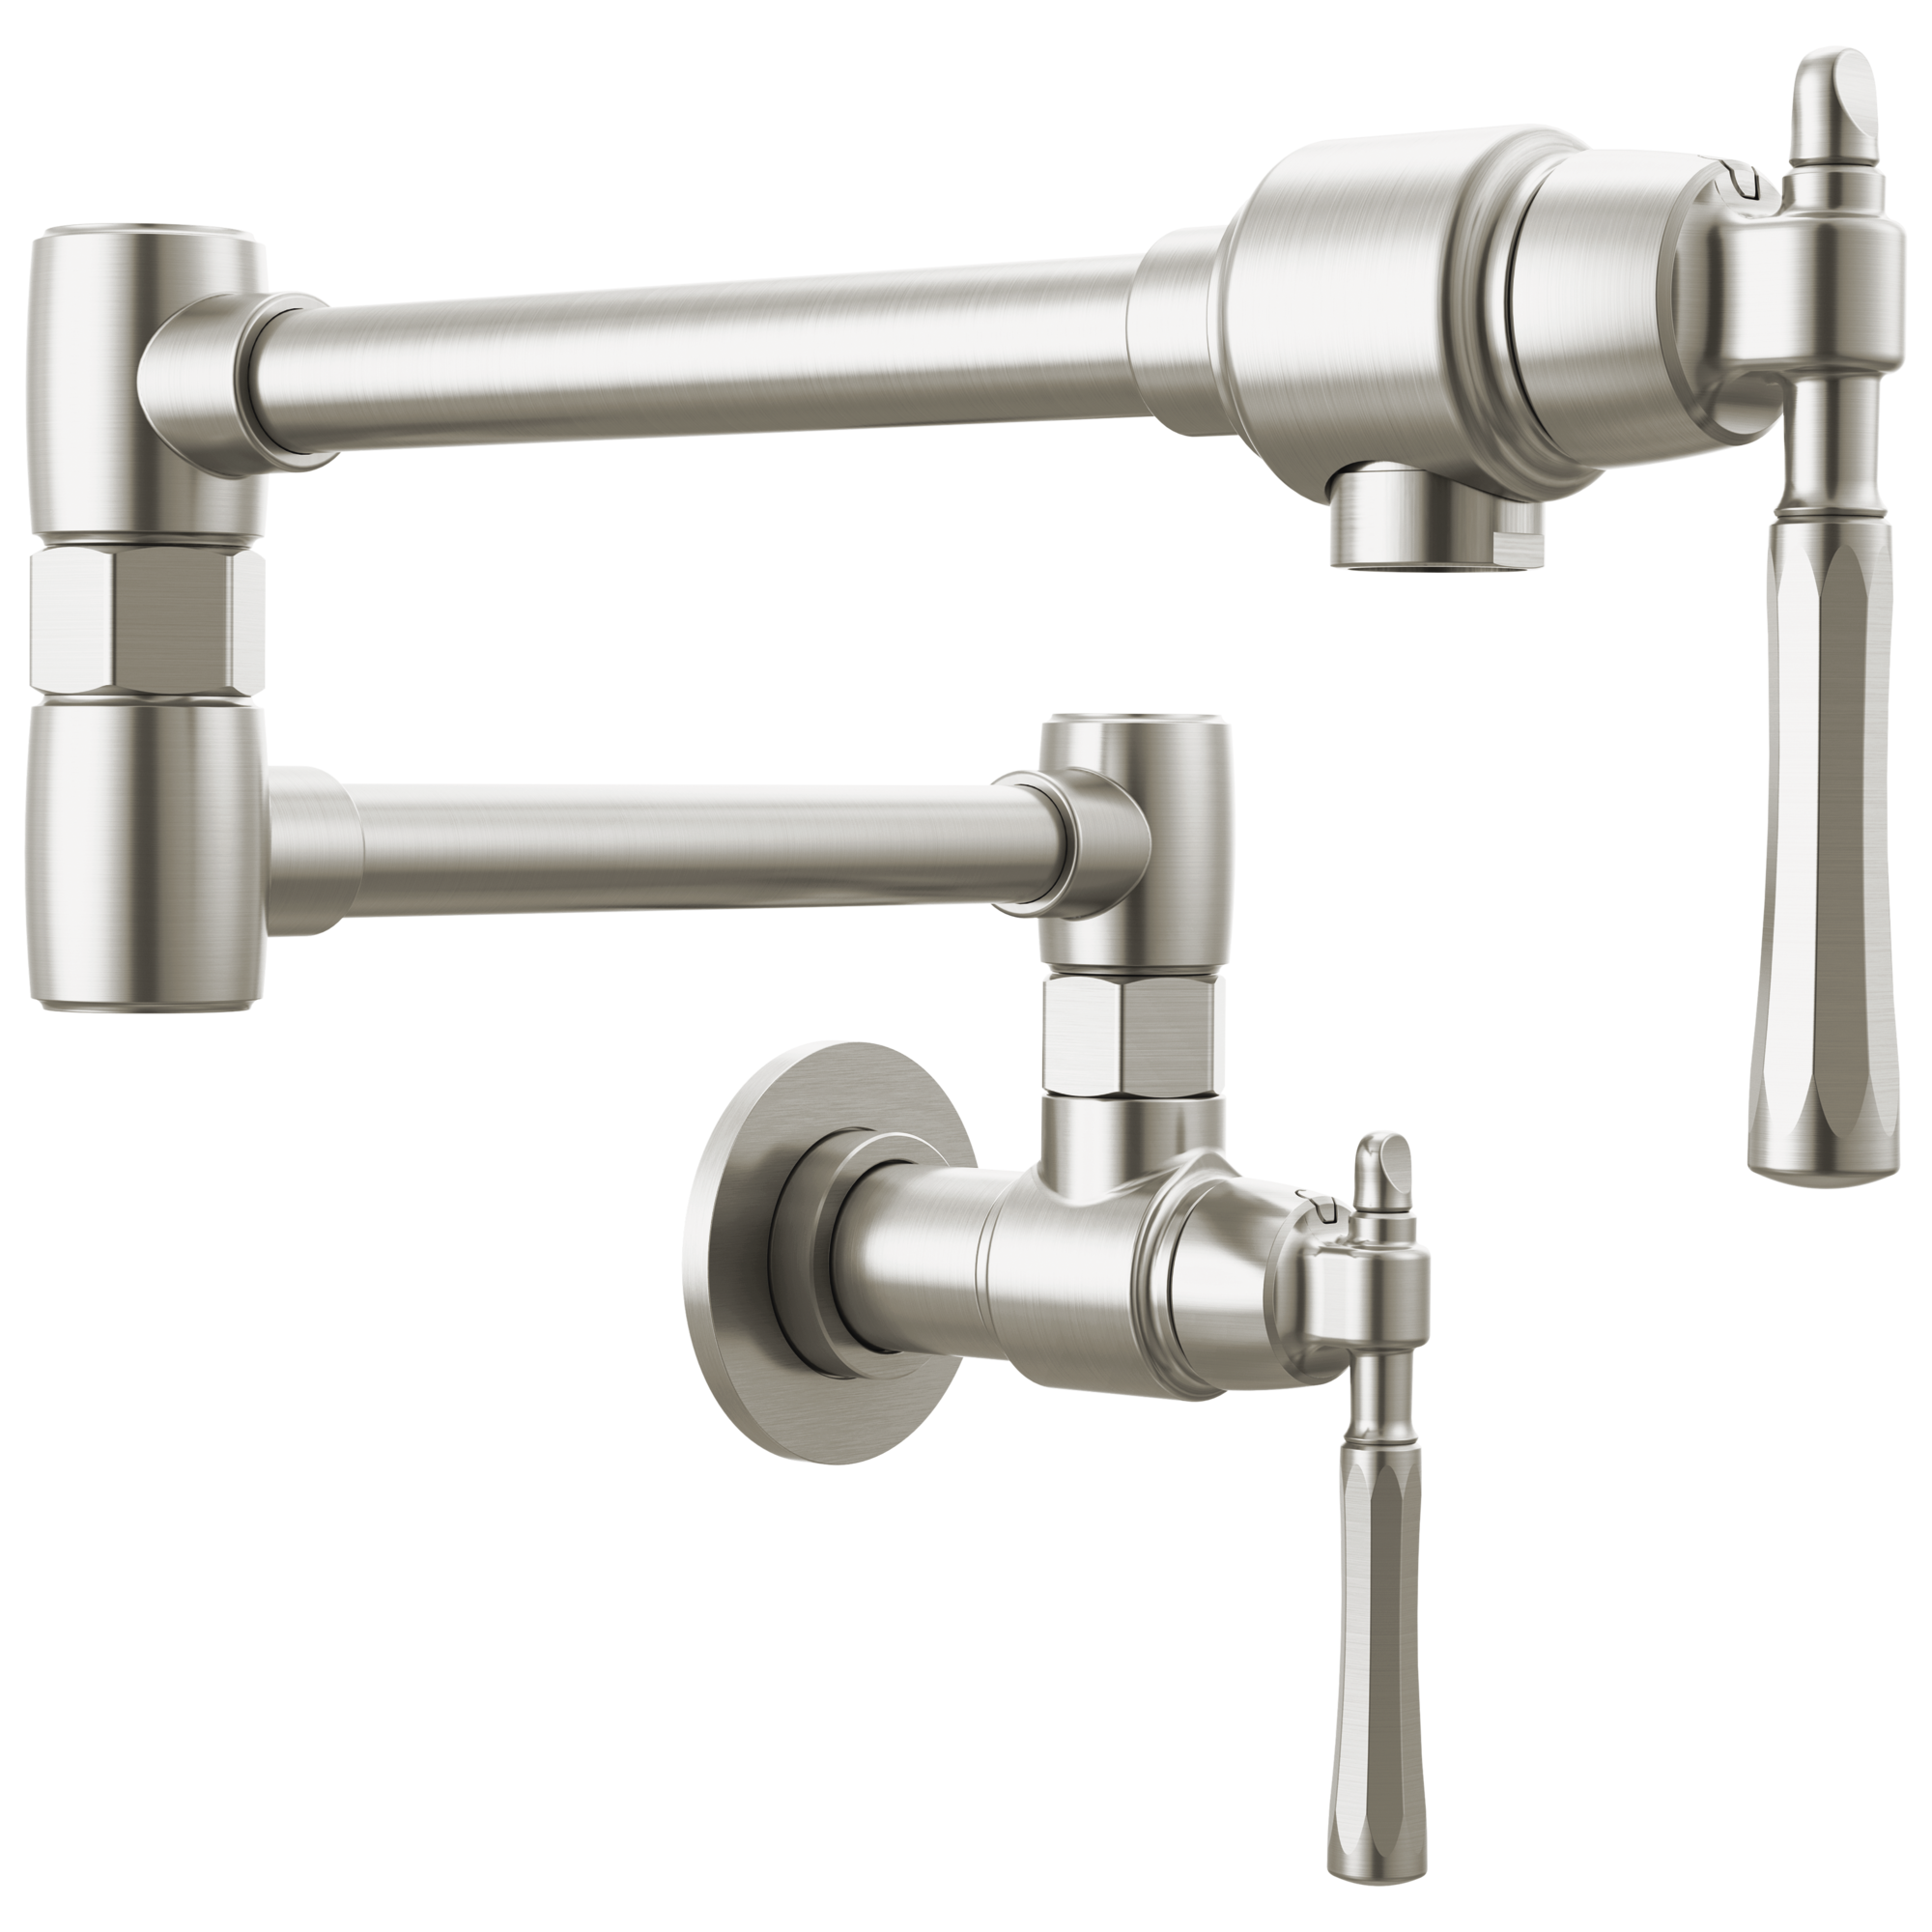 Brizo The Tulham Kitchen Collection by Brizo Wall Mount Pot Filler